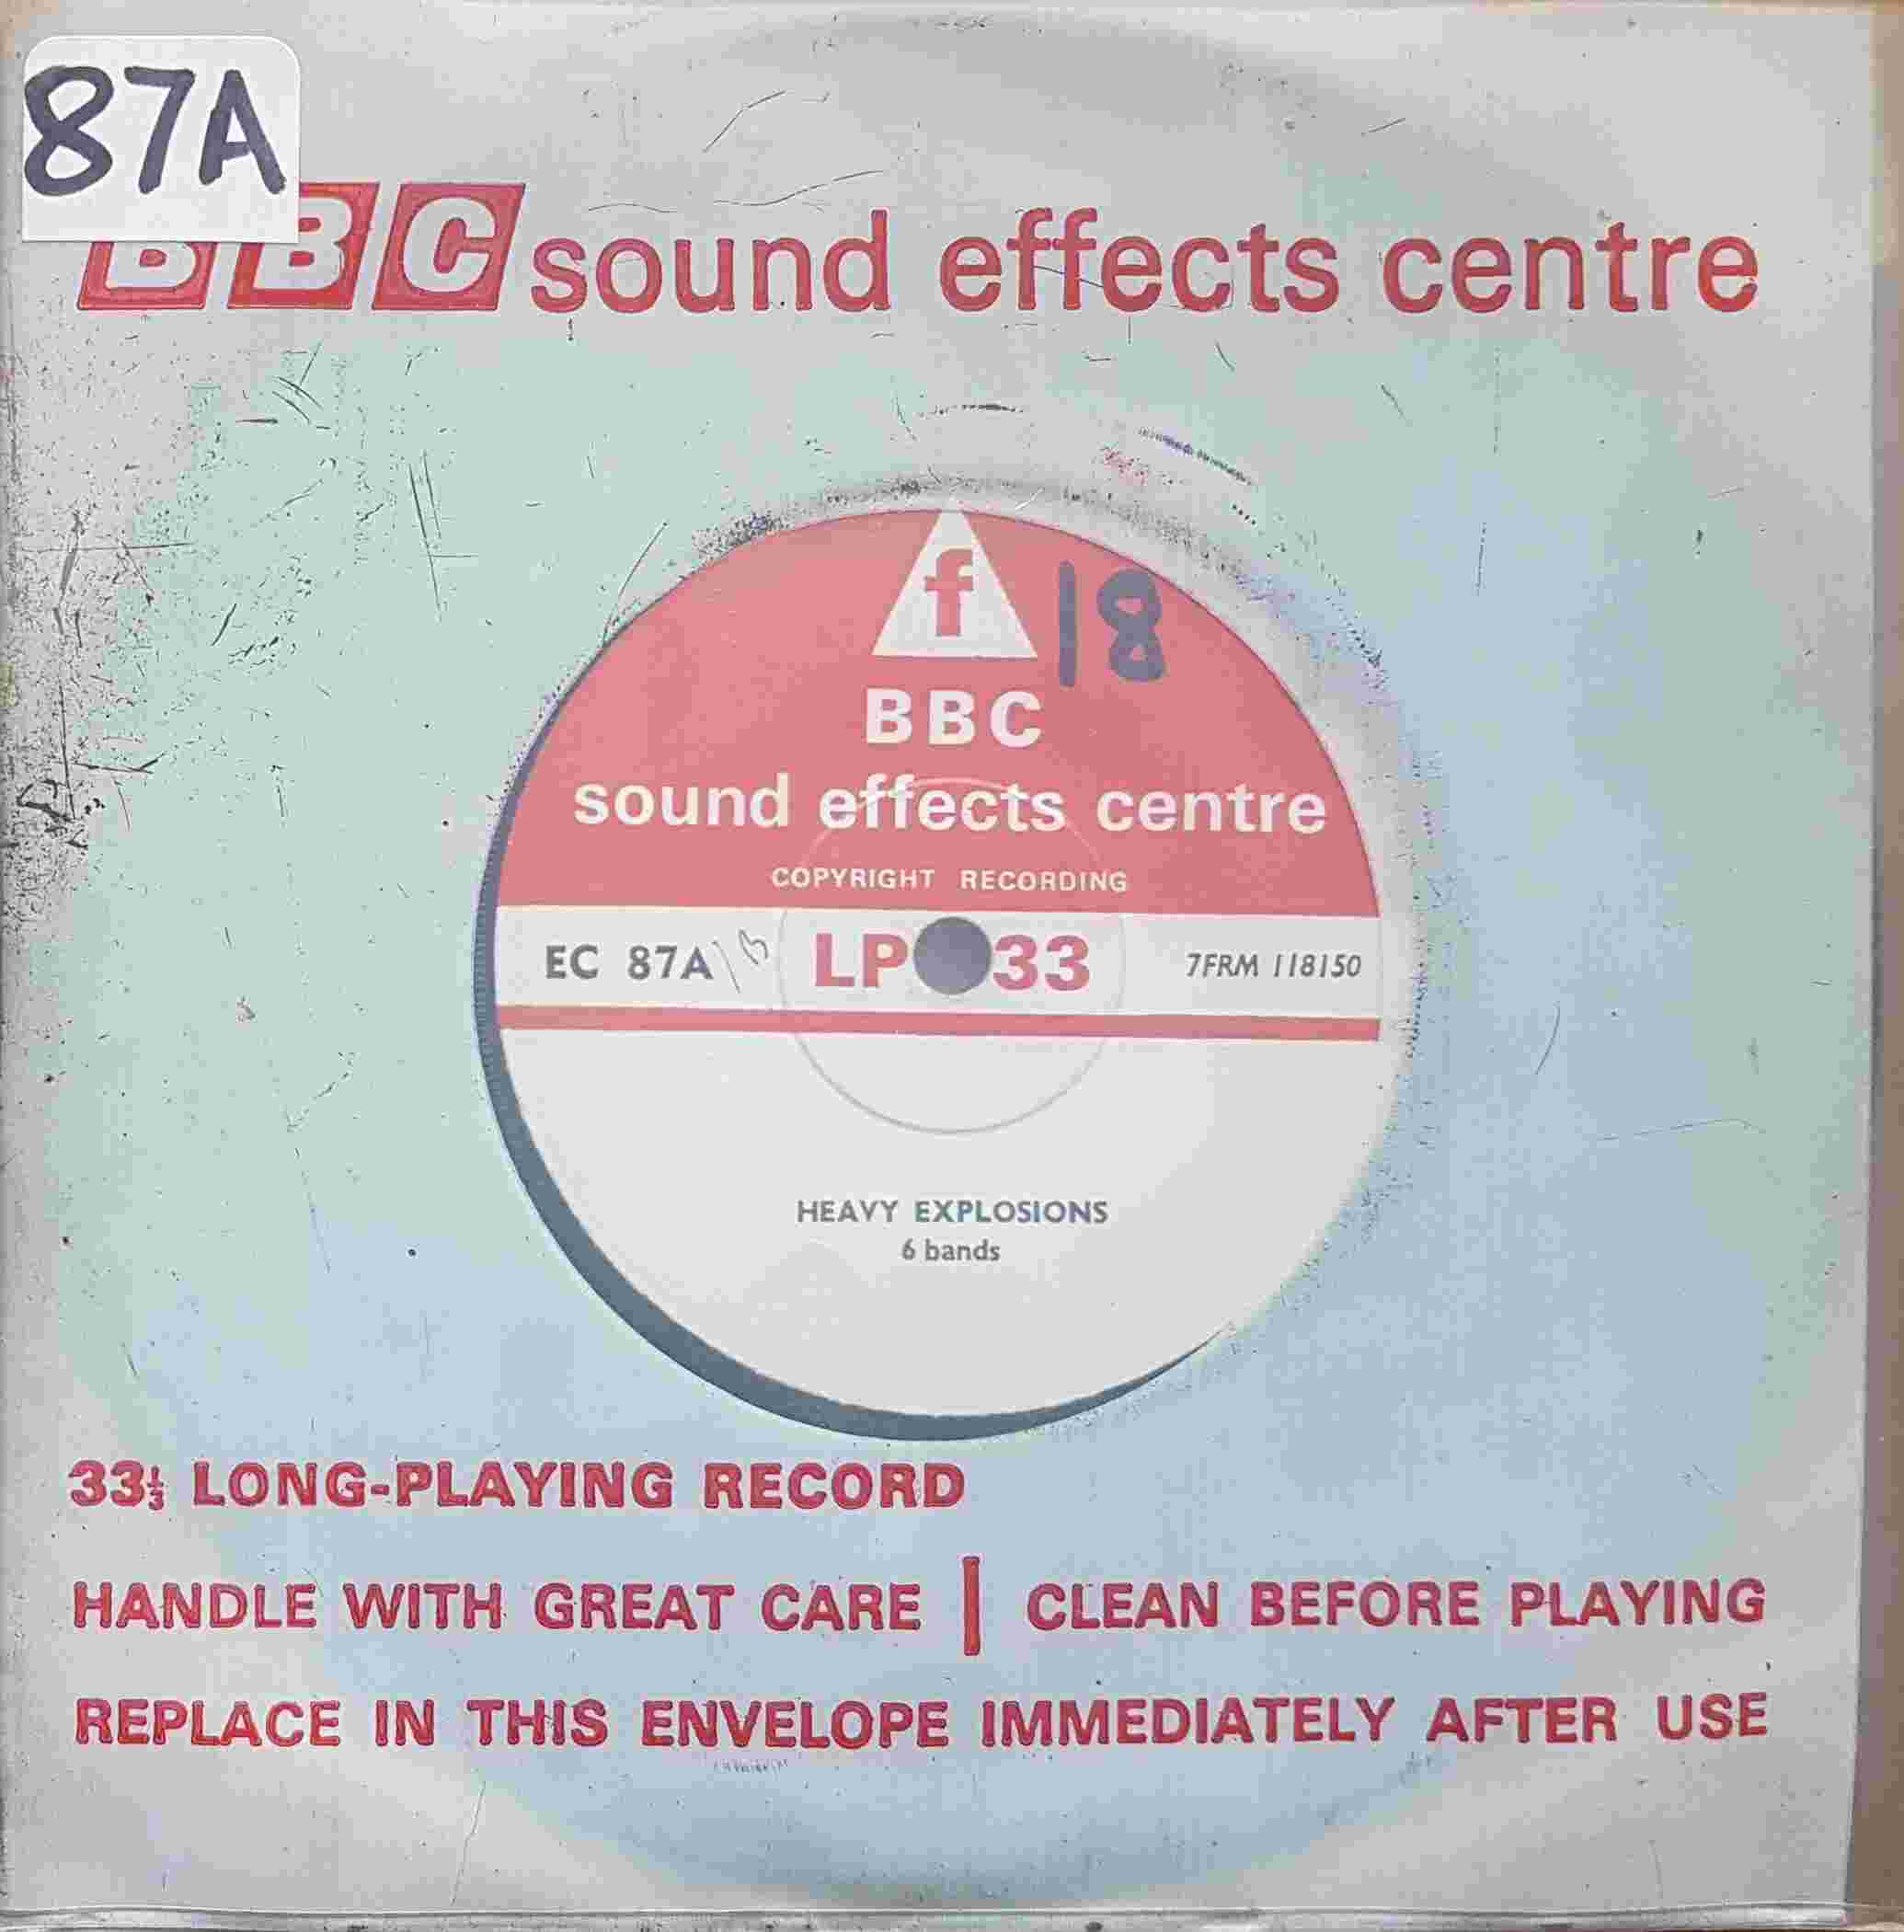 Picture of EC 87A Heavy explosions by artist Not registered from the BBC singles - Records and Tapes library